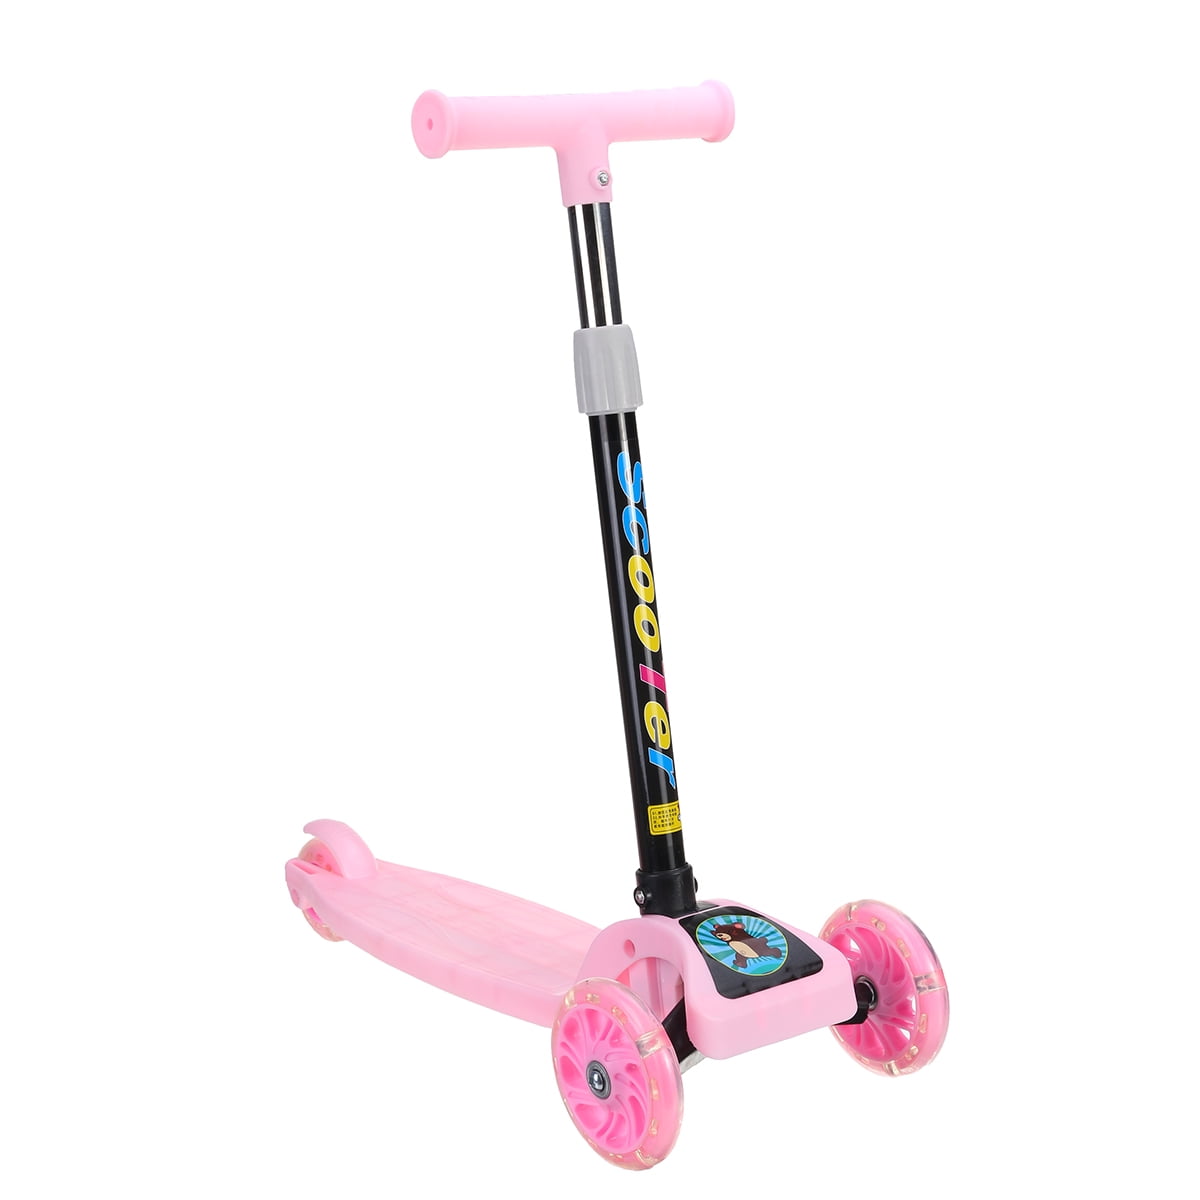 Details about   Kick Scooters Folding 3 Adjustable Height 3 Flashing LED Wheels For Toddler/Kids 